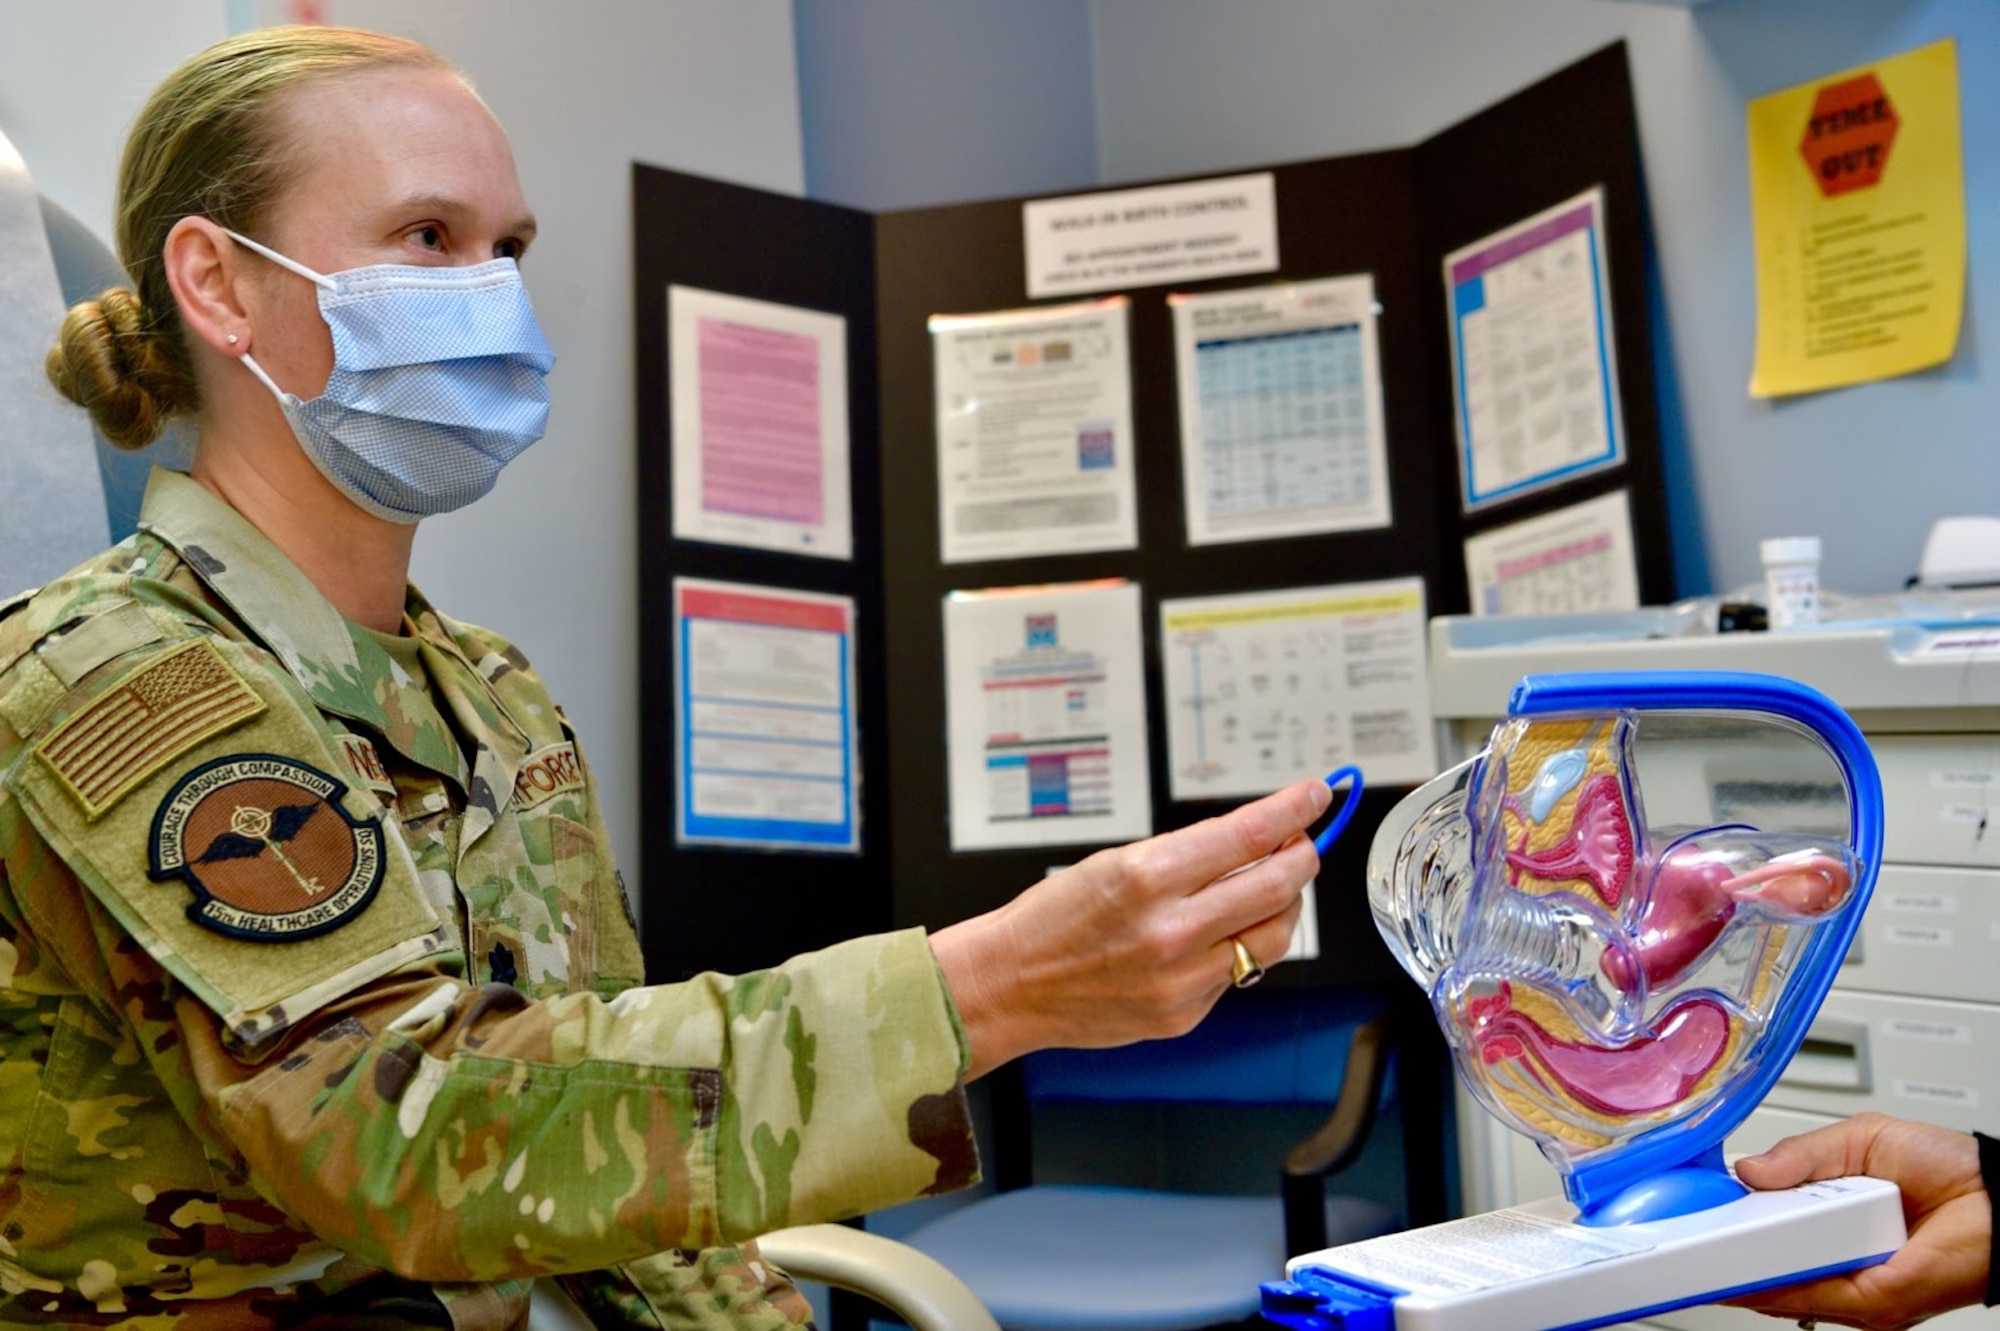 Lt. Col. Paula Neemann, 15th Healthcare Operations Squadron clinical medicine flight commander, demonstrates many birth control options, such as a birth control ring, at the 15th MDG at Joint Base Pearl Harbor-Hickam, Hawaii, May 6, 2021. The contraceptive clinic aims to educate on all types of contraceptive methods and answer any questions beneficiaries may have. (U.S. Air Force photo by 2nd Lt. Benjamin Aronson)